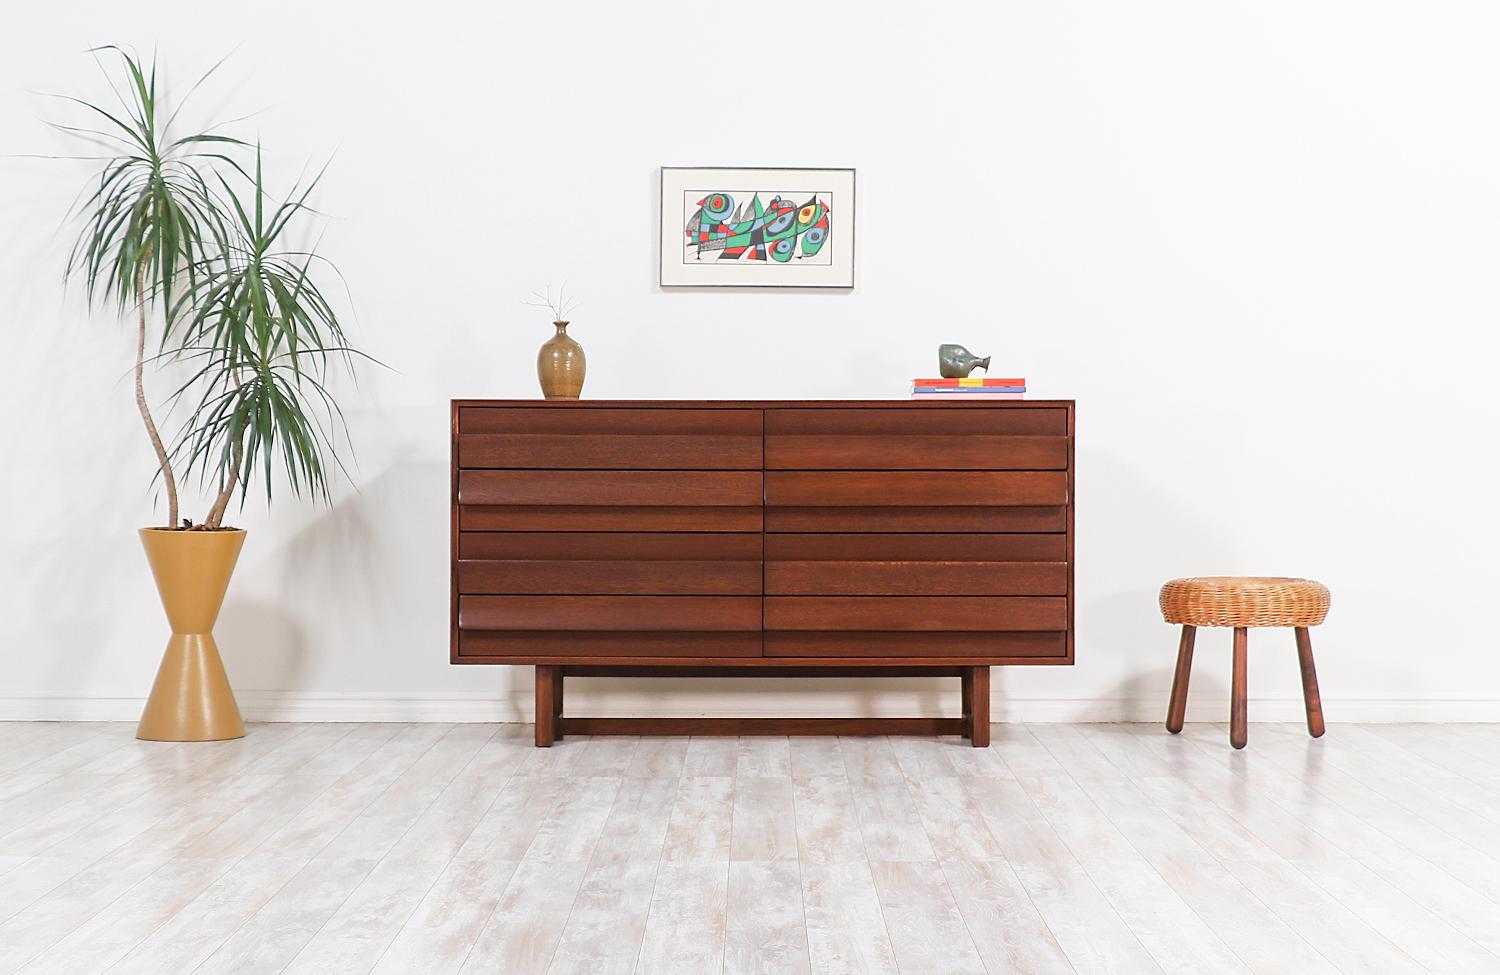 Sleek and curvature dresser designed by fame Hungarian-born modern architect and interior designer Paul Laszlo. This example was designed in collaboration with California company, Brown Saltman, who operated in the city of Los Angeles in the 1950s.